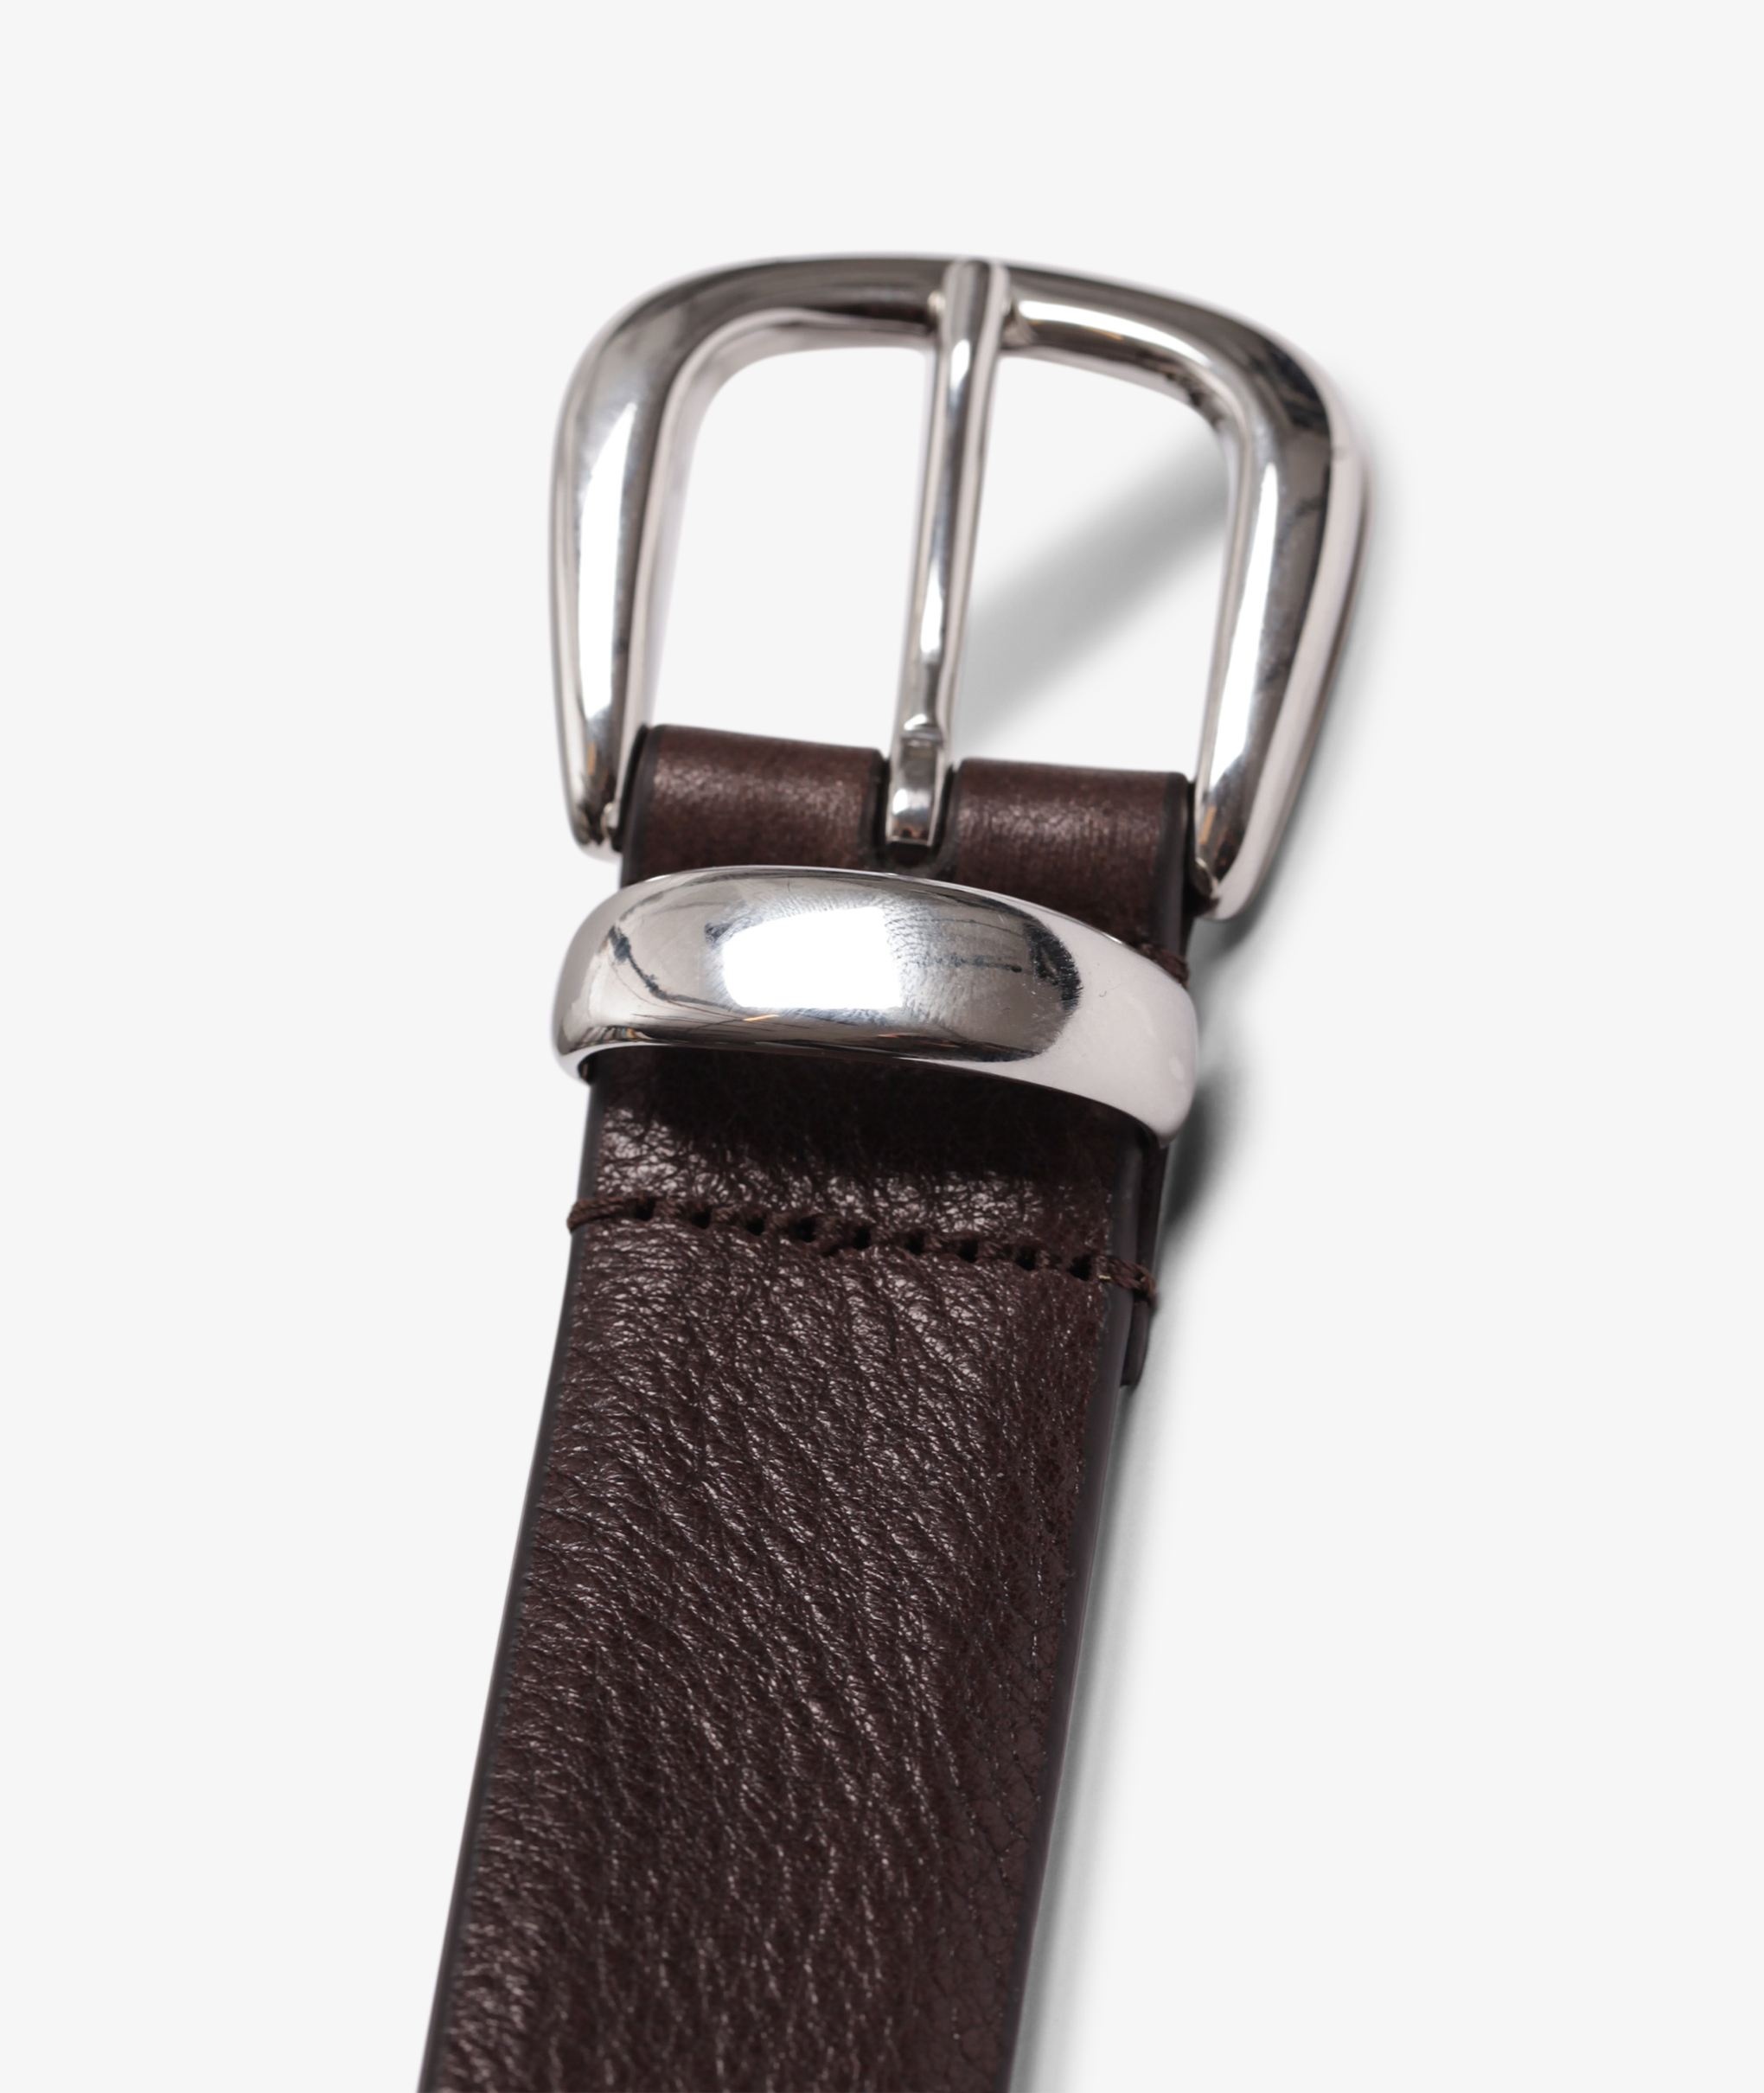 Norse Store | Shipping Worldwide - Anderson's Grainy Leather Belt 